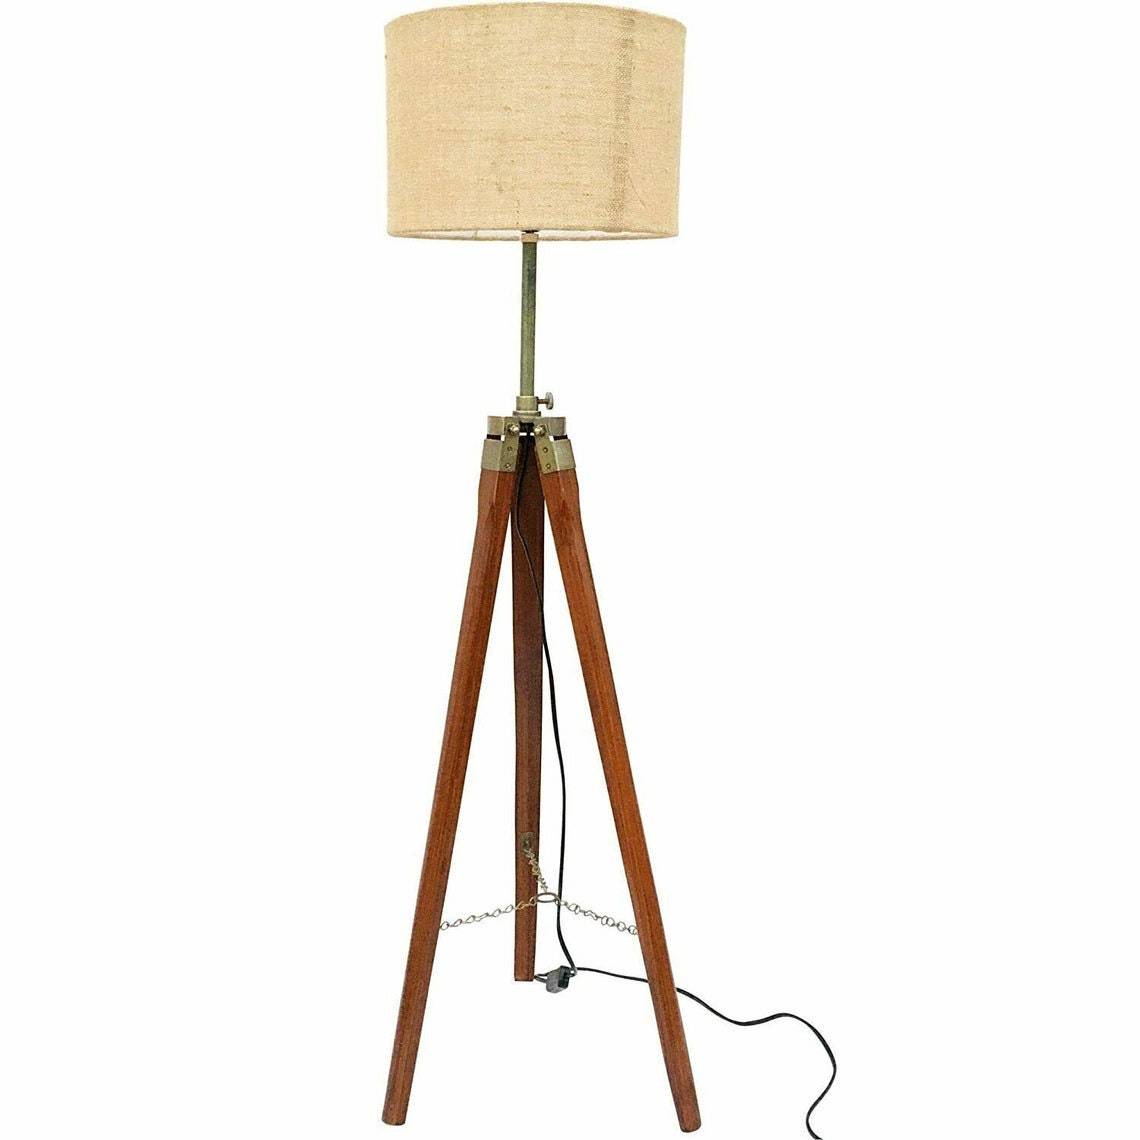 Lamps And Light Jute Fabric with Khadi Shade Wooden Tripod Floor Lamp Stand Chri